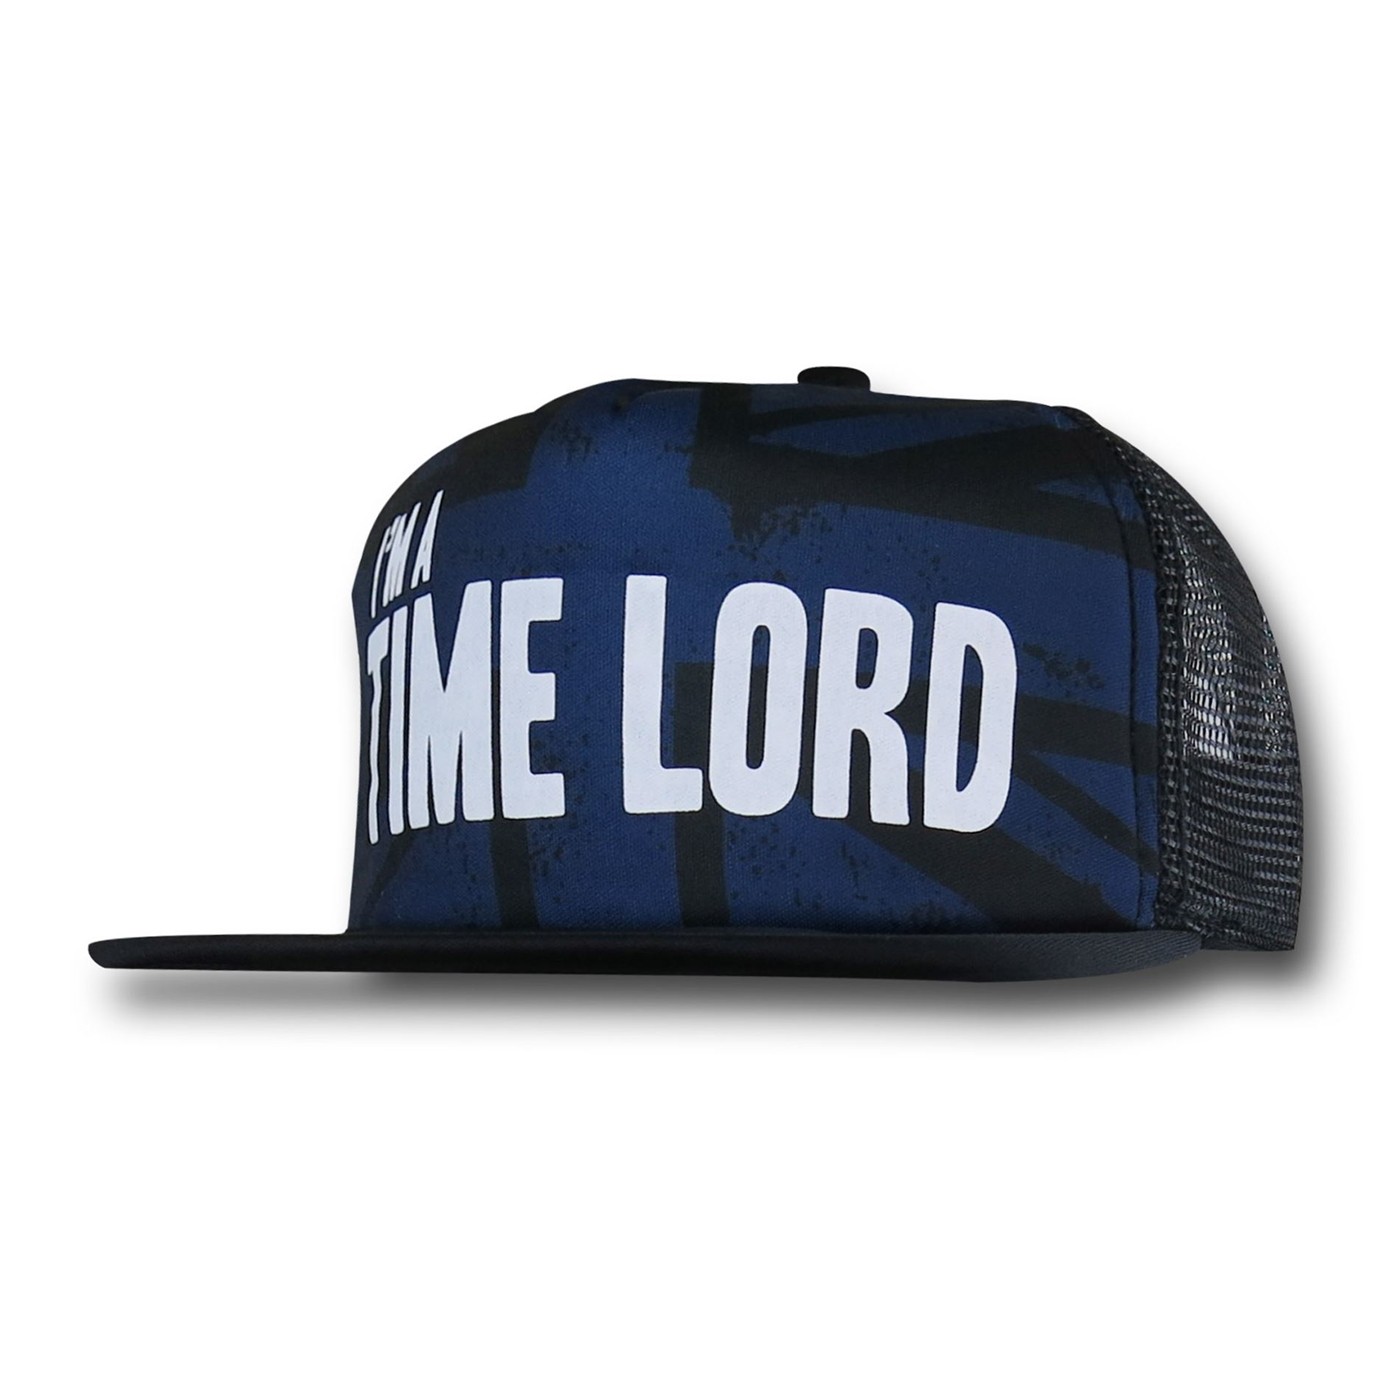 Doctor Who Time Lord Trucker Hat